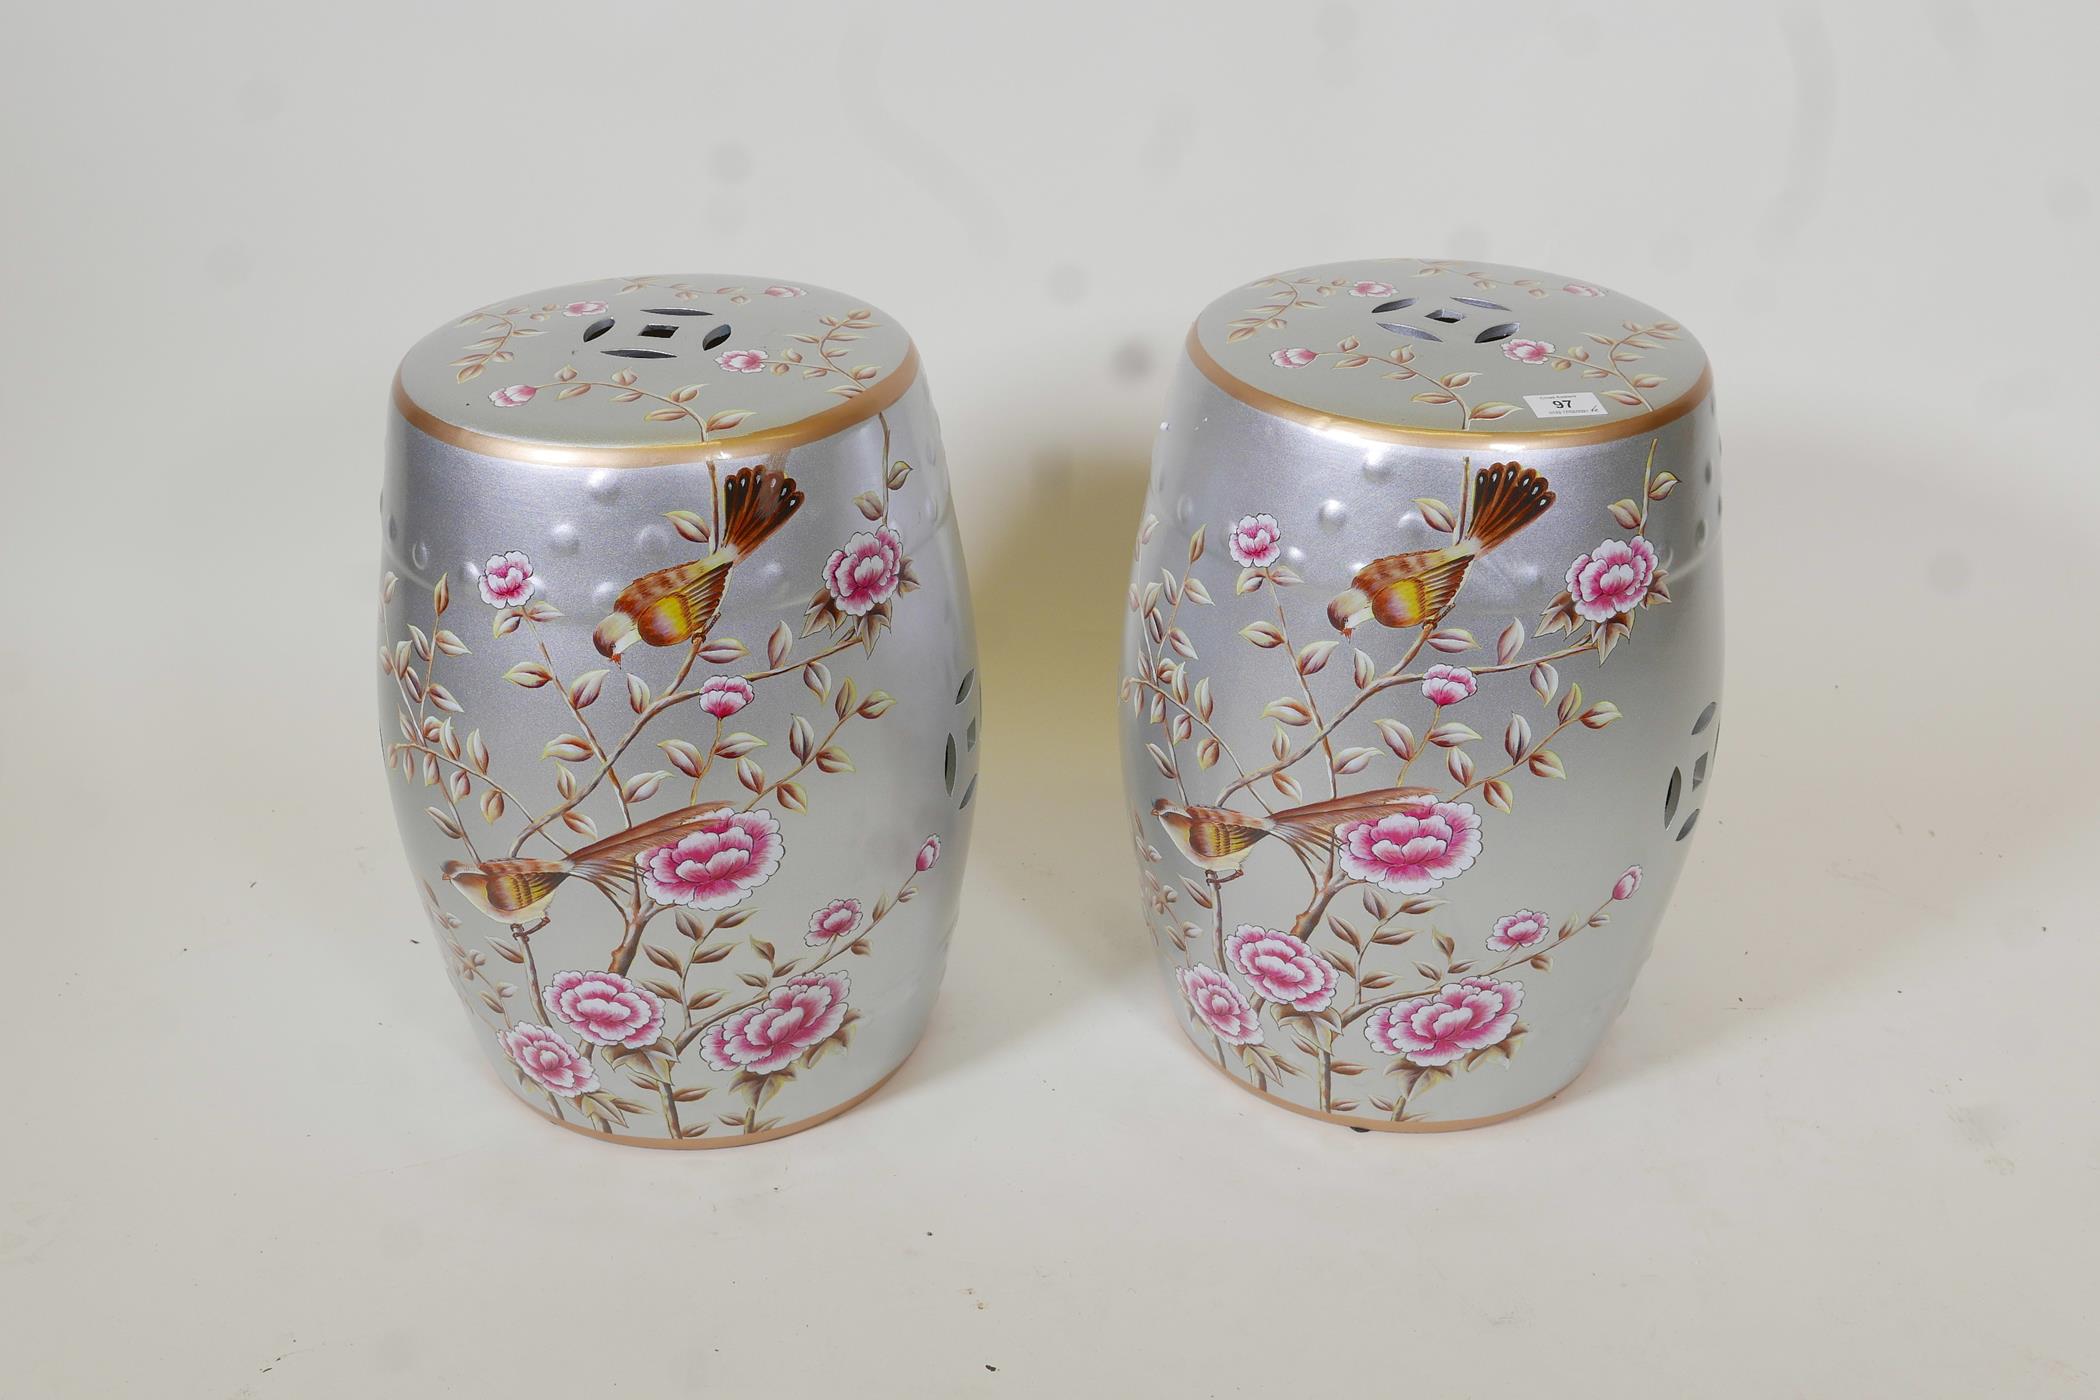 A pair of porcelain garden stools decorated with birds and flowers in bright enamels on a silver